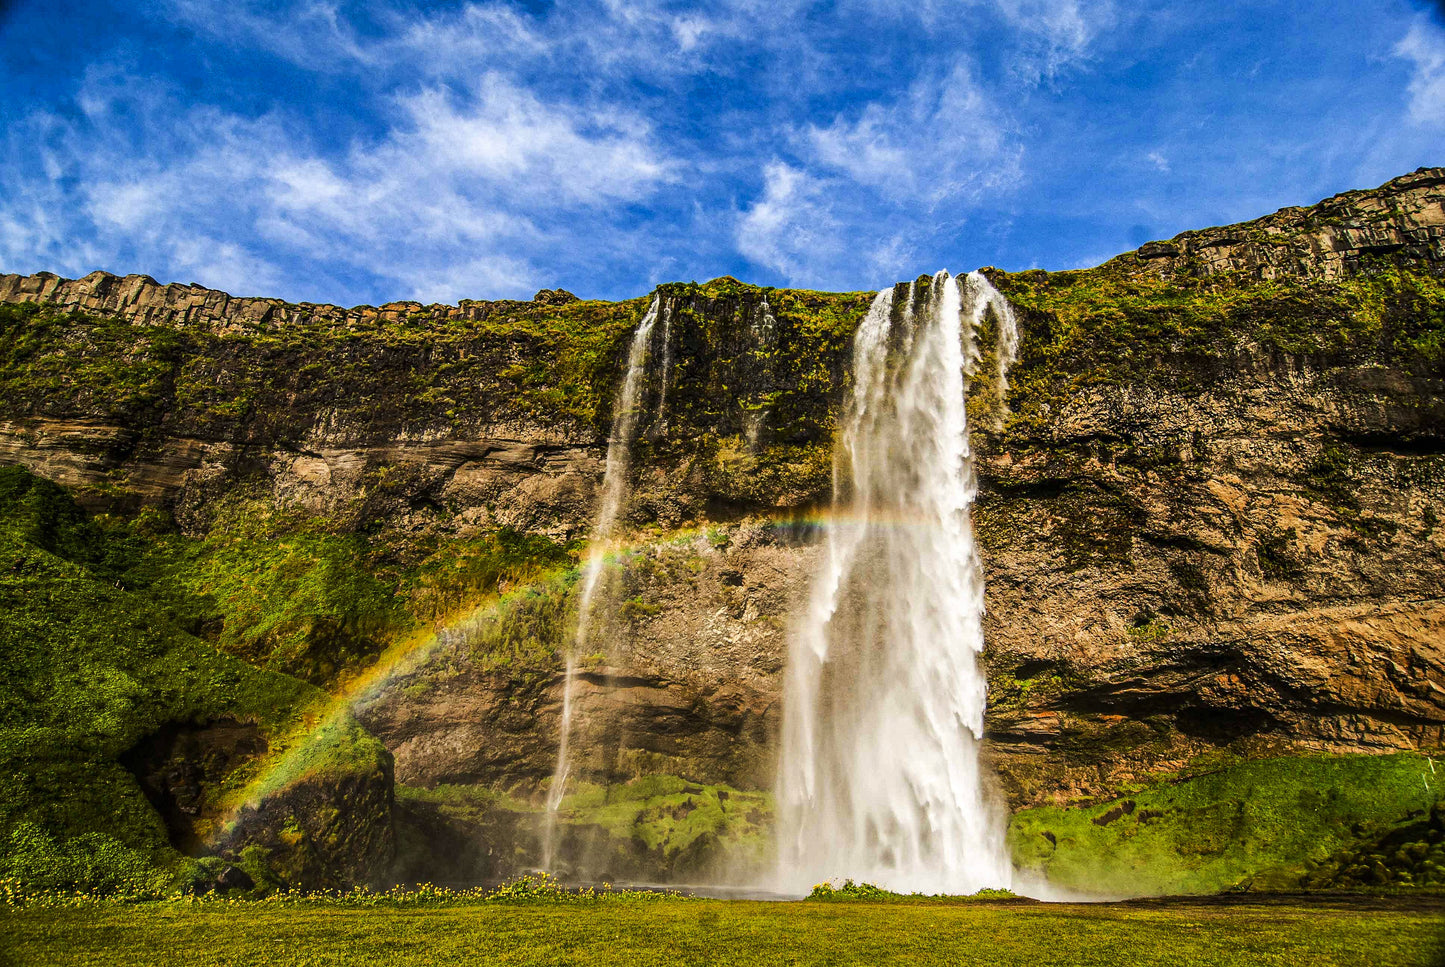 Alessandra Mattanza | FAIRY RAINBOW, Iceland. The mists of an Icelandic waterfall gives rise to a spectacular rainbow. Available as an art print or as a photographic print on acrylic glass.